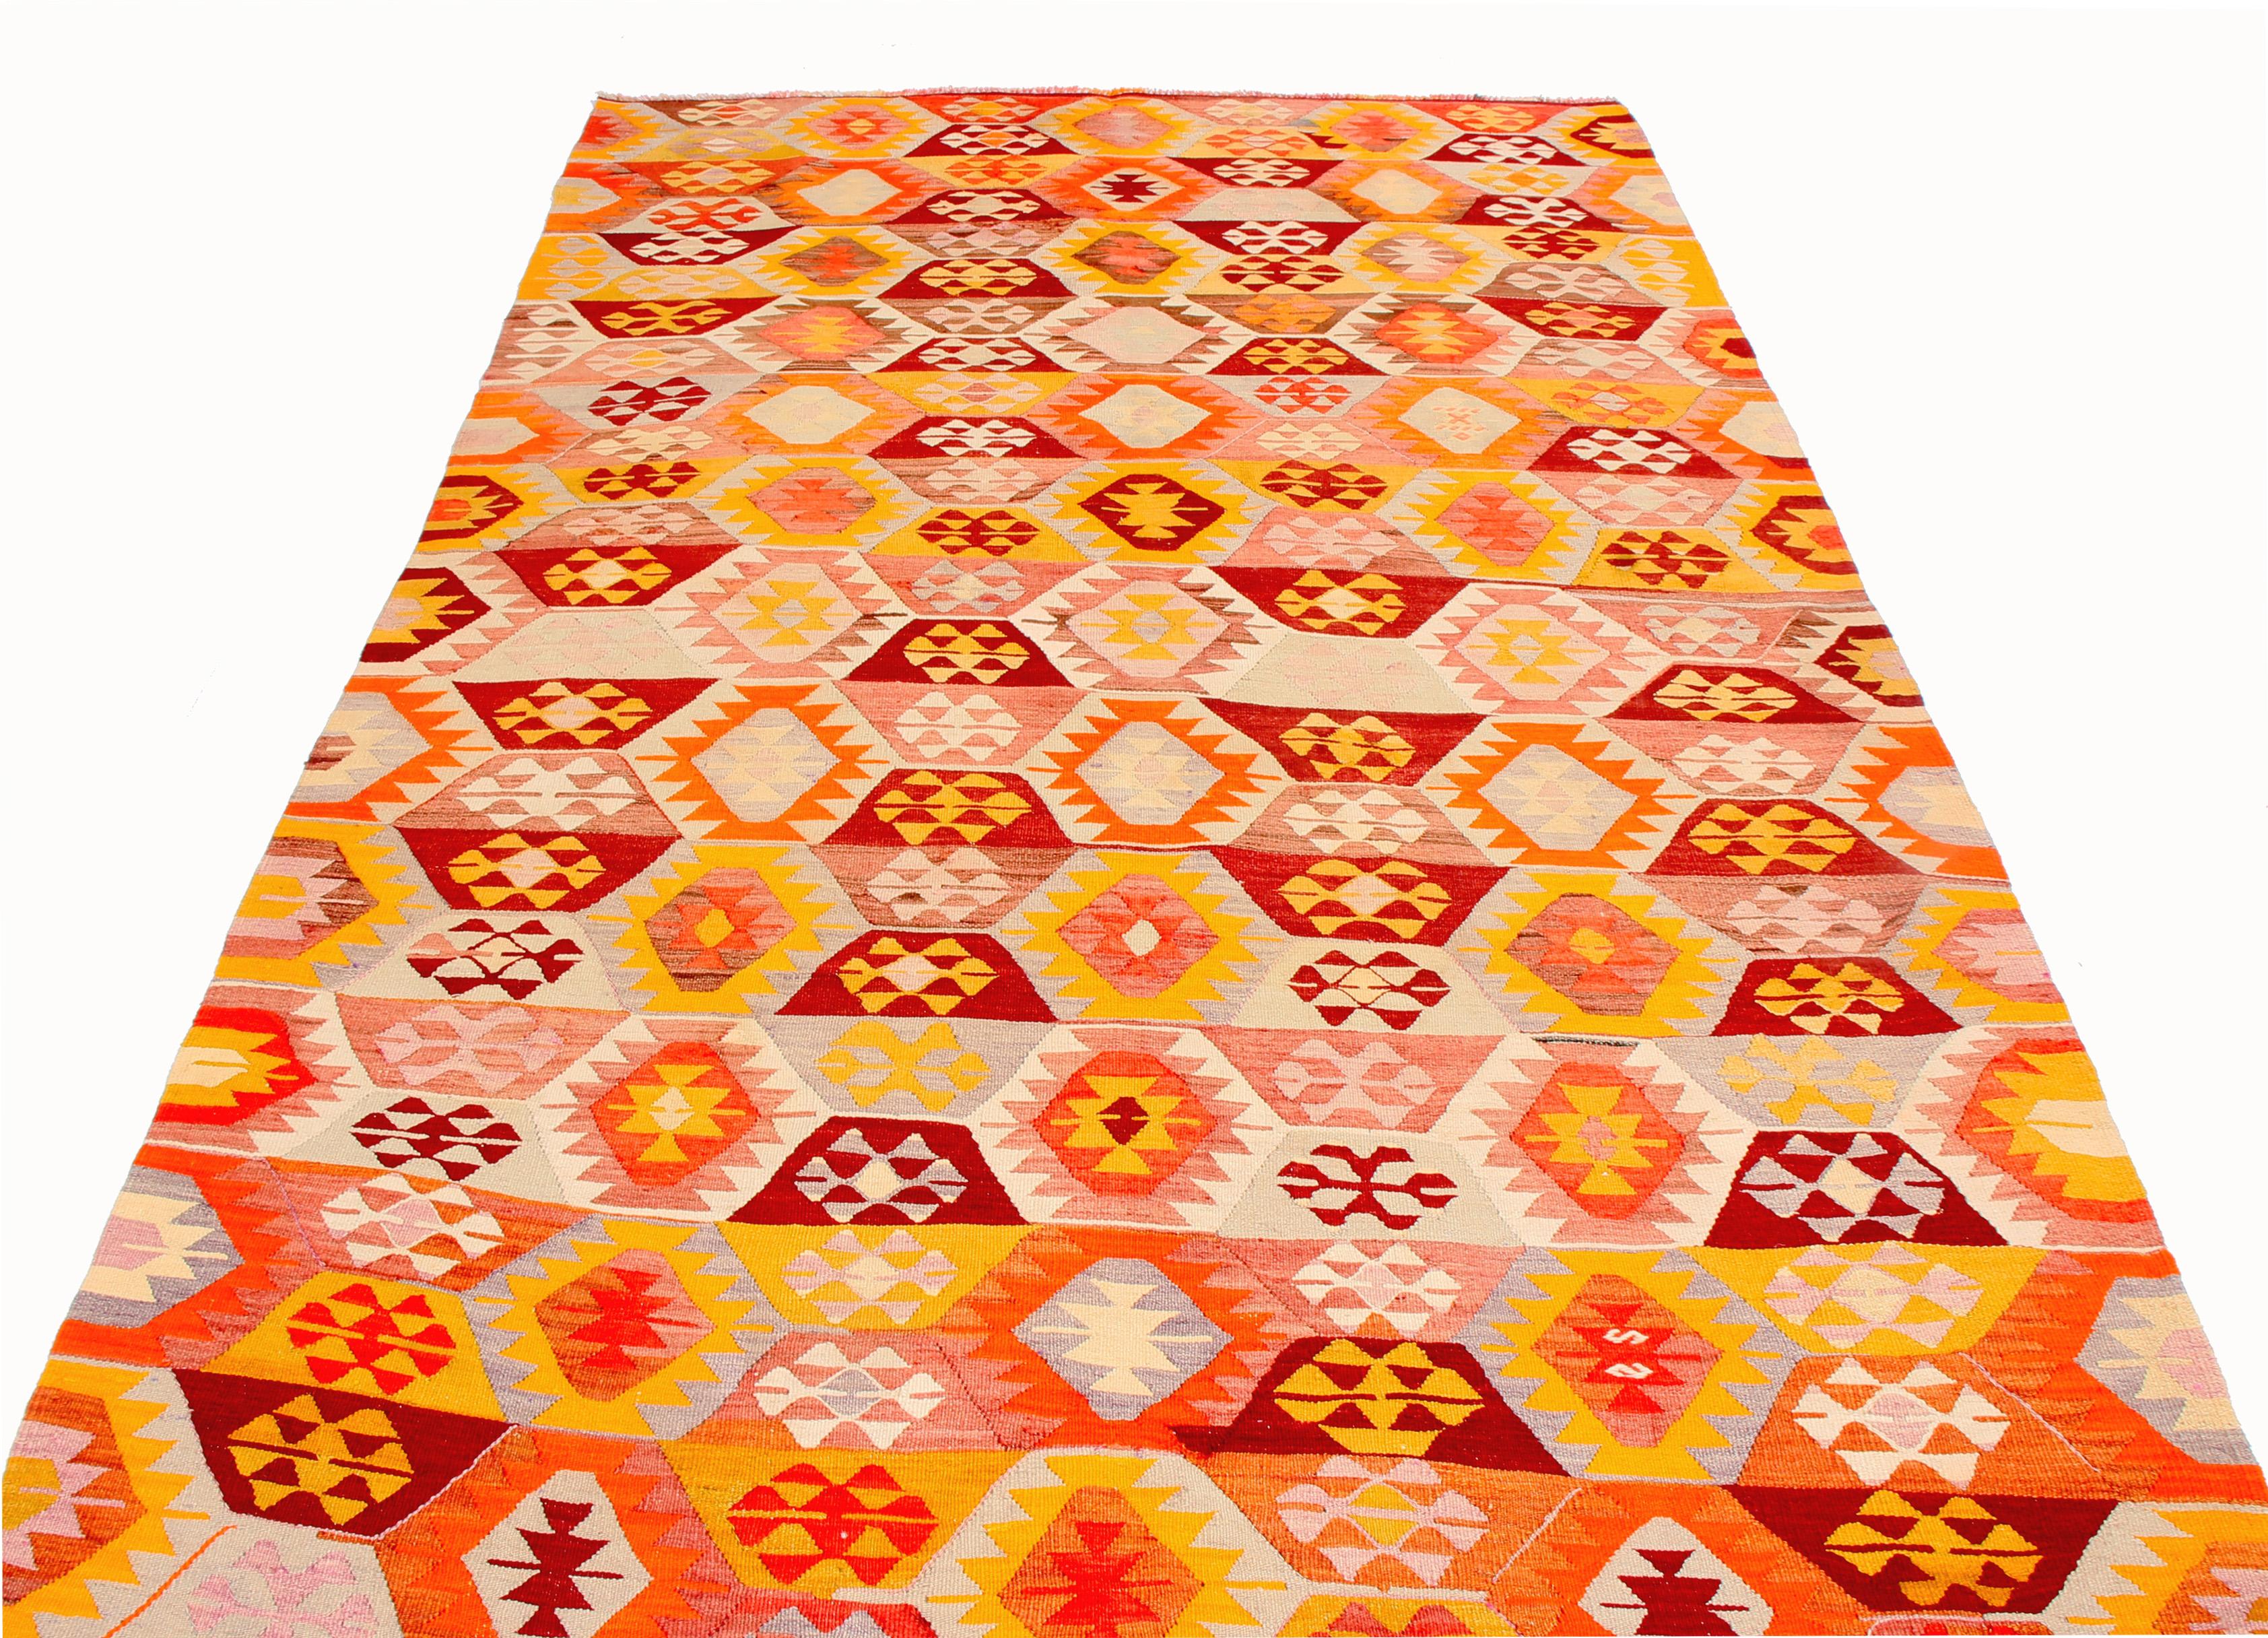 Handwoven with high-quality wool originating from Turkey between 1940-1950, this vintage geometric Kilim rug enjoys a tastefully abrashed pallet of muted-but-lively blue, orange, golden-yellow, white, and multi-tonal pink colorways highlighting the